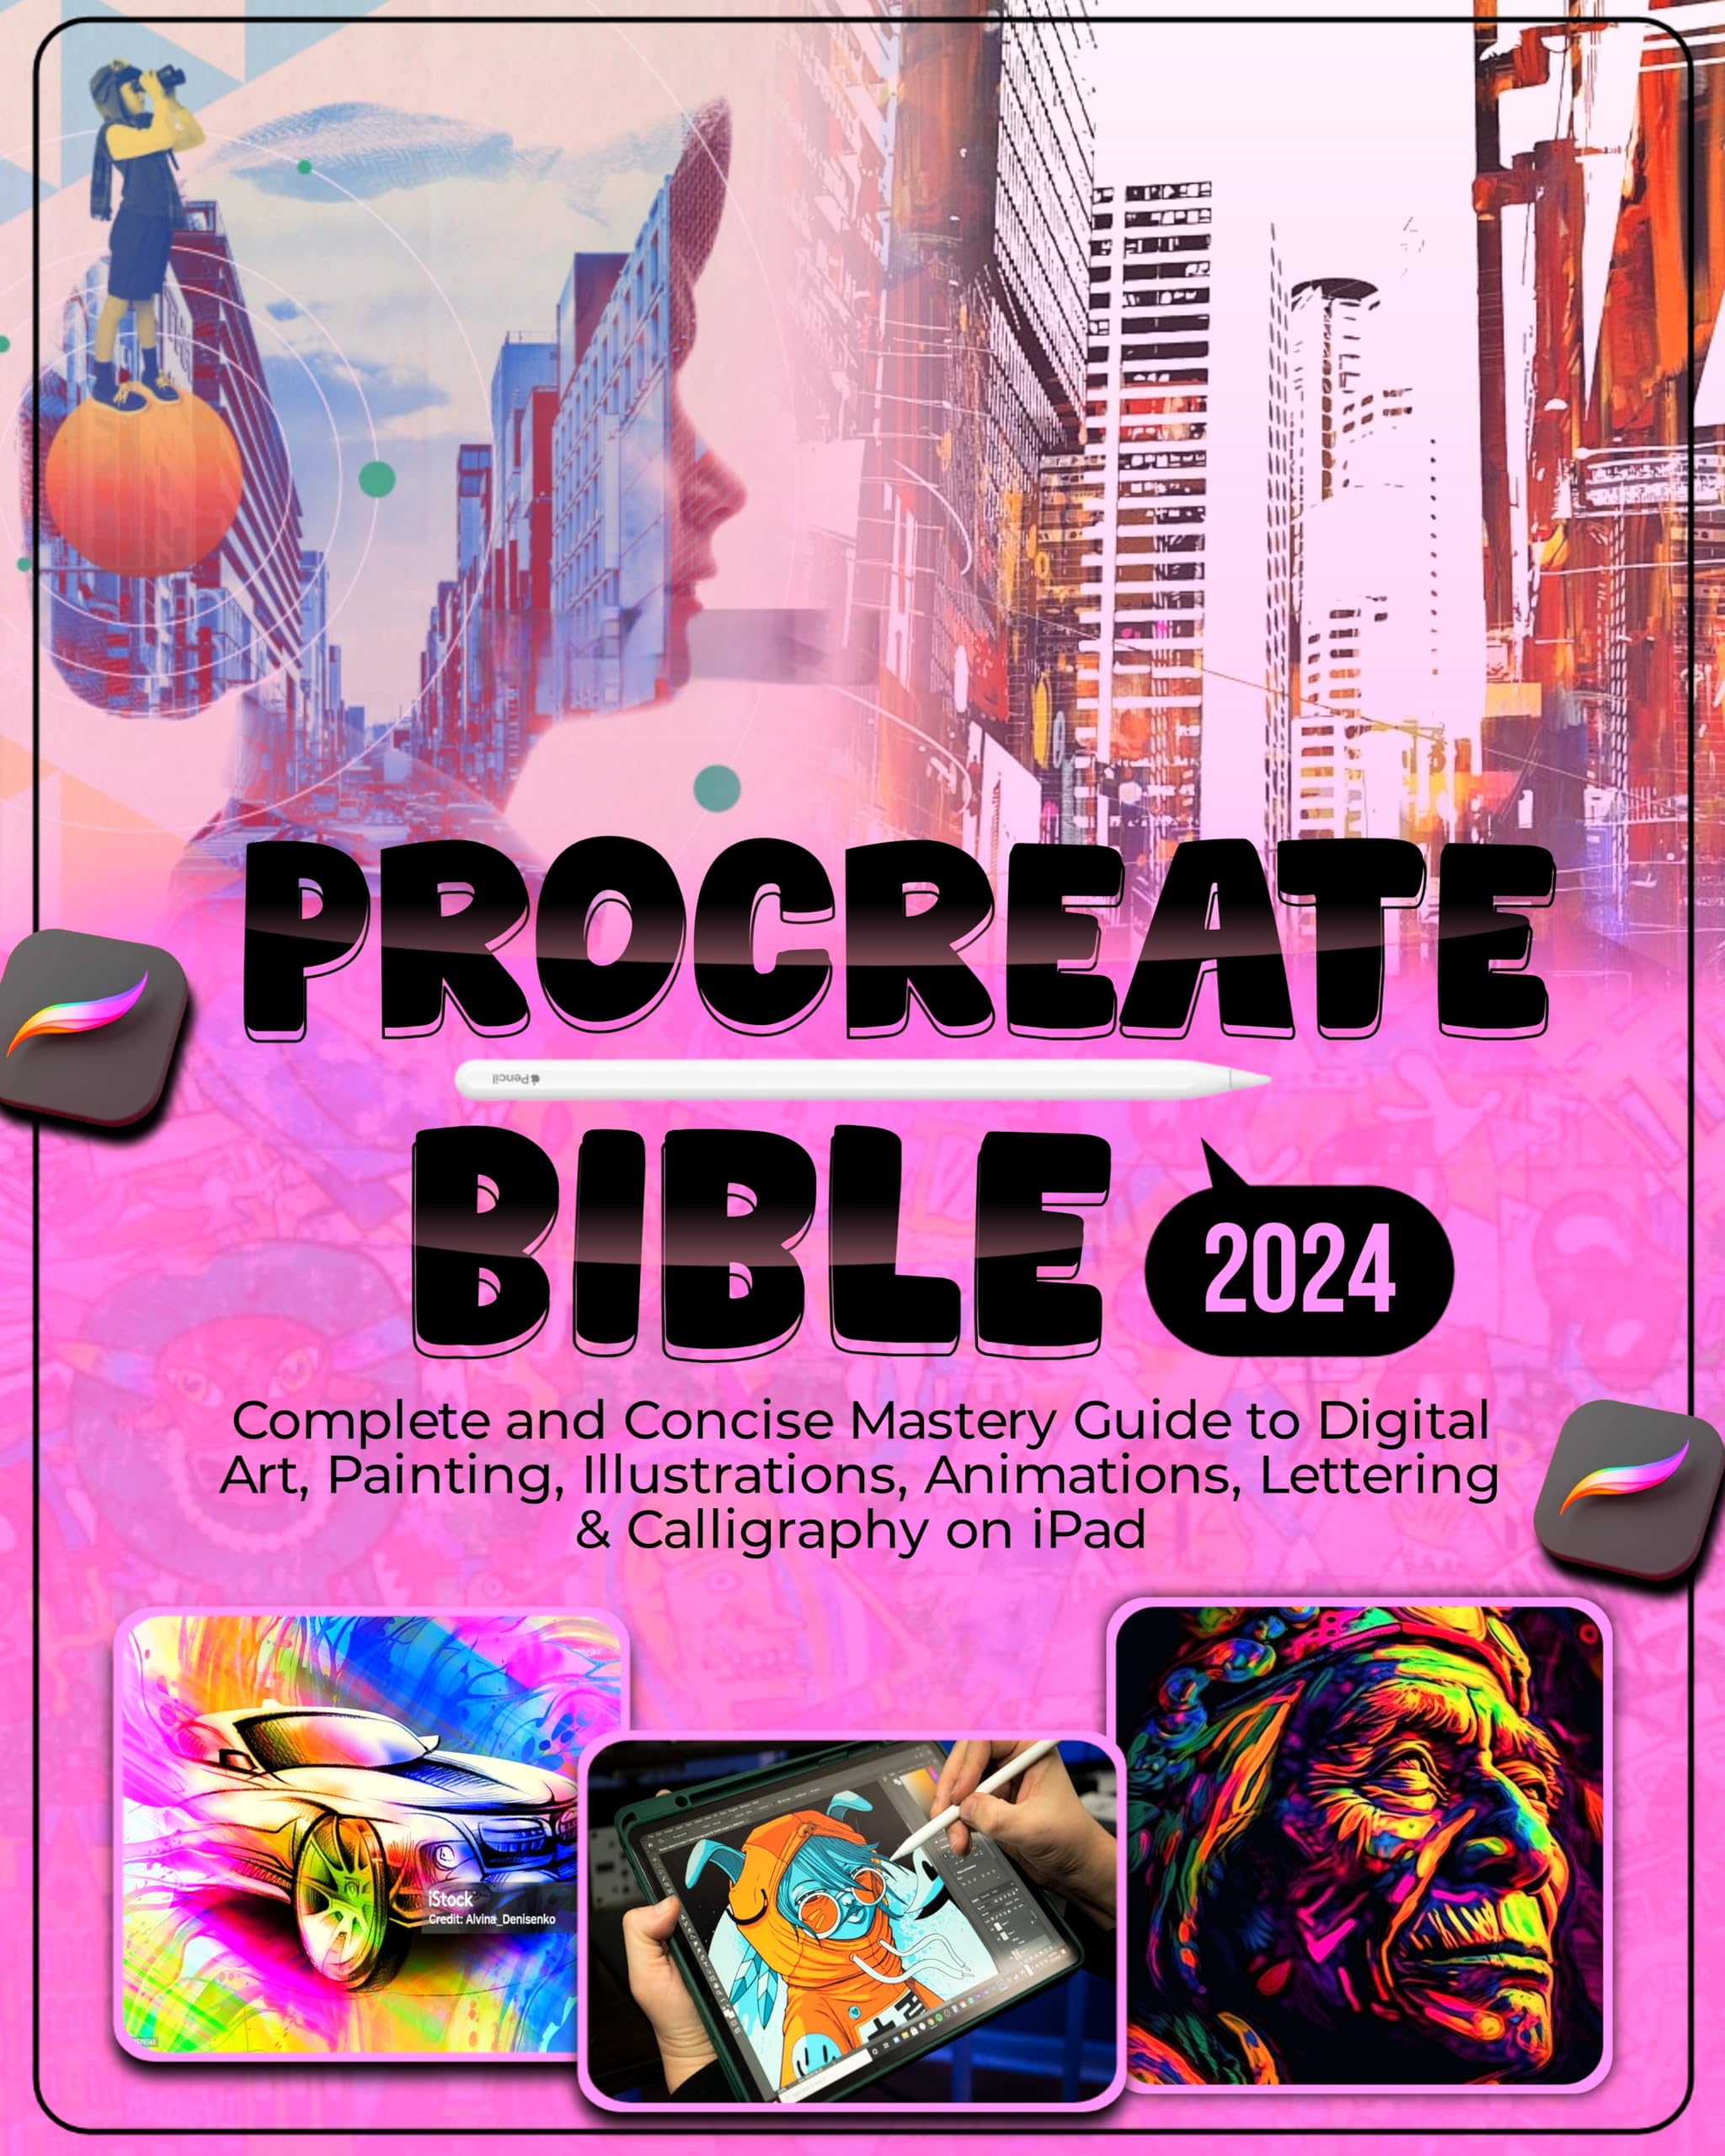 Procreate Bible 2024: Complete and Concise Mastery Guide to Digital Art, Painting, Illustrations, Animation, Lettering & Calligraphy on iPad